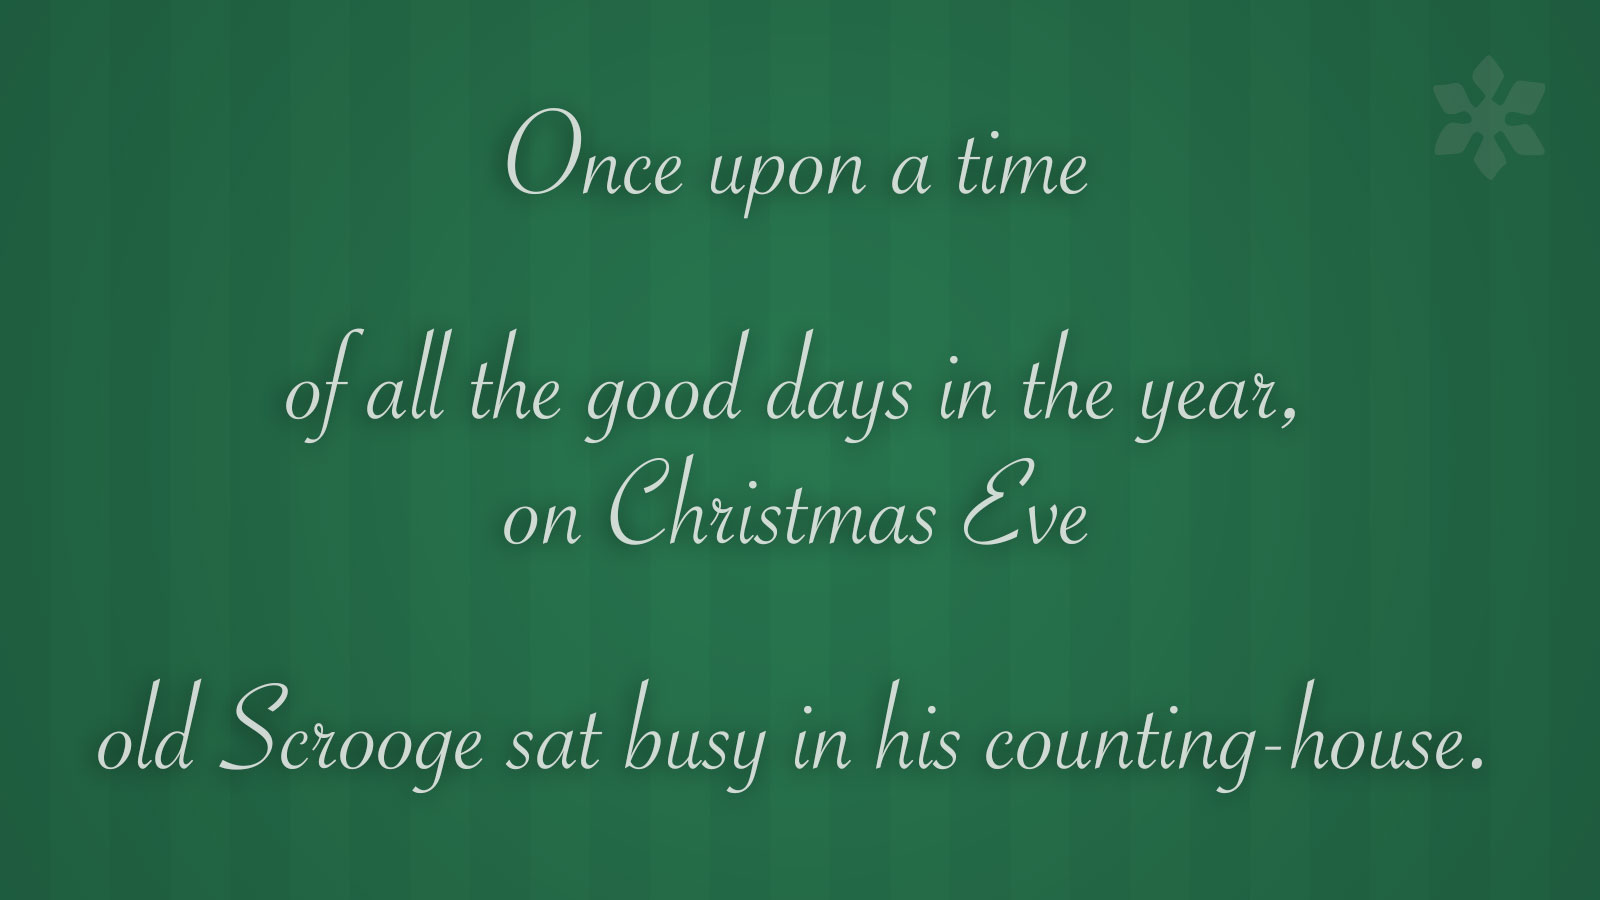 Charles Dickens quote from A Christmas Carol on a green background with vertical stripes: "Once upon a time - of all the good days in the year, on Christmas Eve - old Scrooge sat busy in his counting-house."